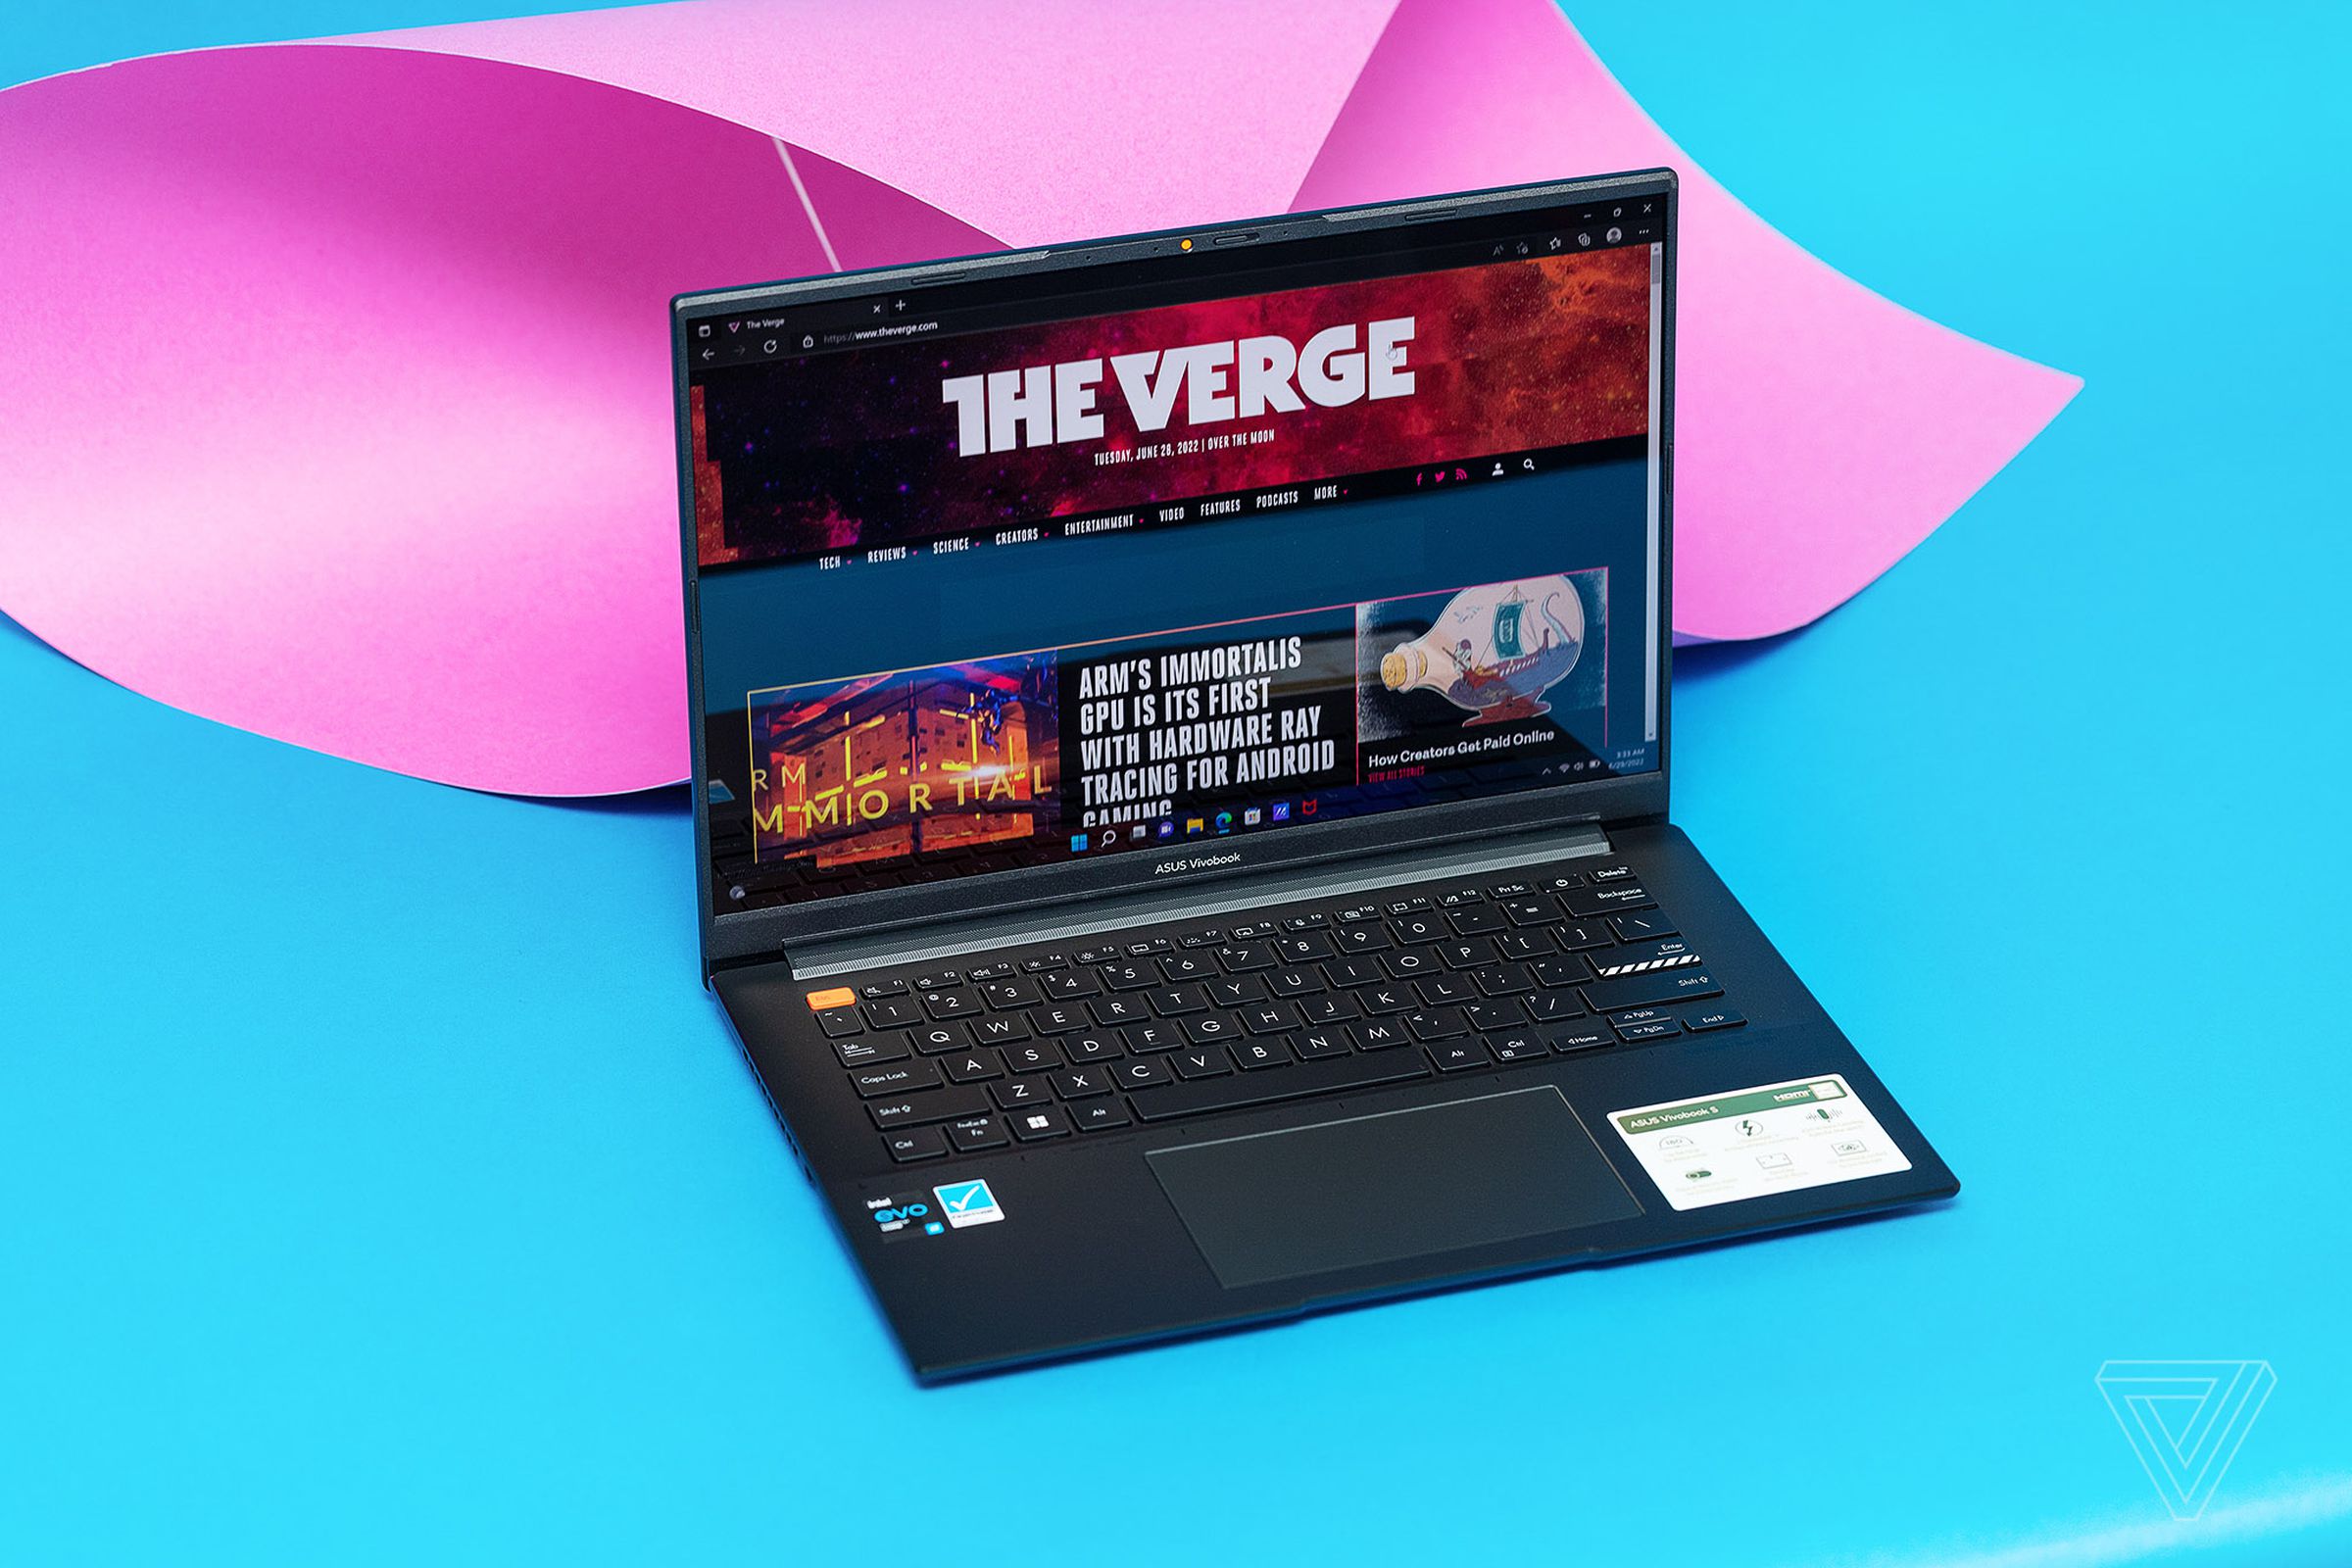 The Asus Vivobook S 14X OLED seen from above on a blue and pink background. The screen displays The Verge homepage.